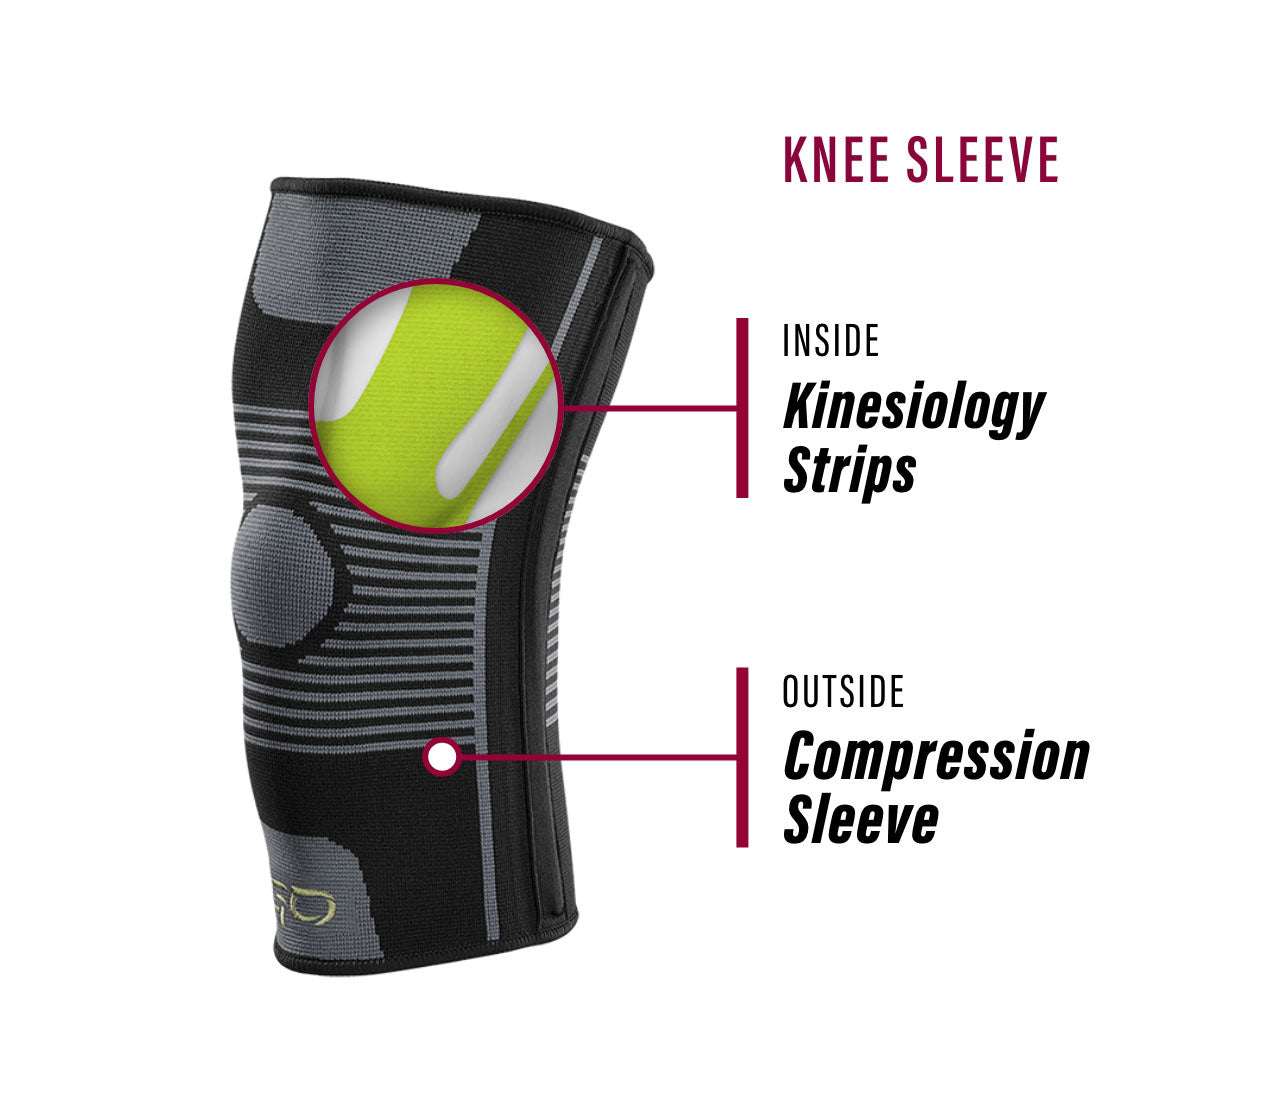 GO Sleeves - Compression + Kinesiology